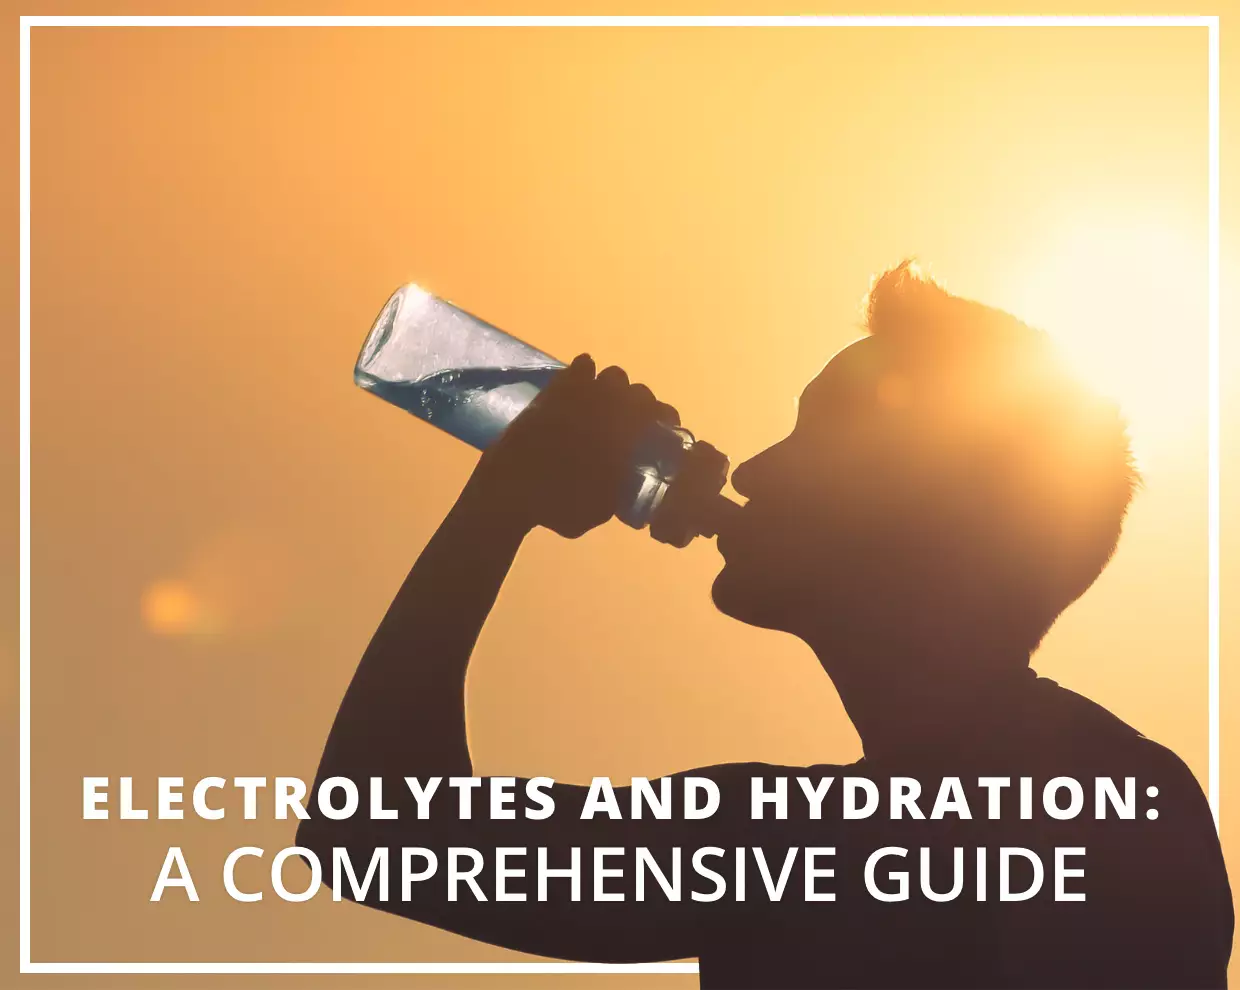 Electrolytes and Hydration: A Comprehensive Guide